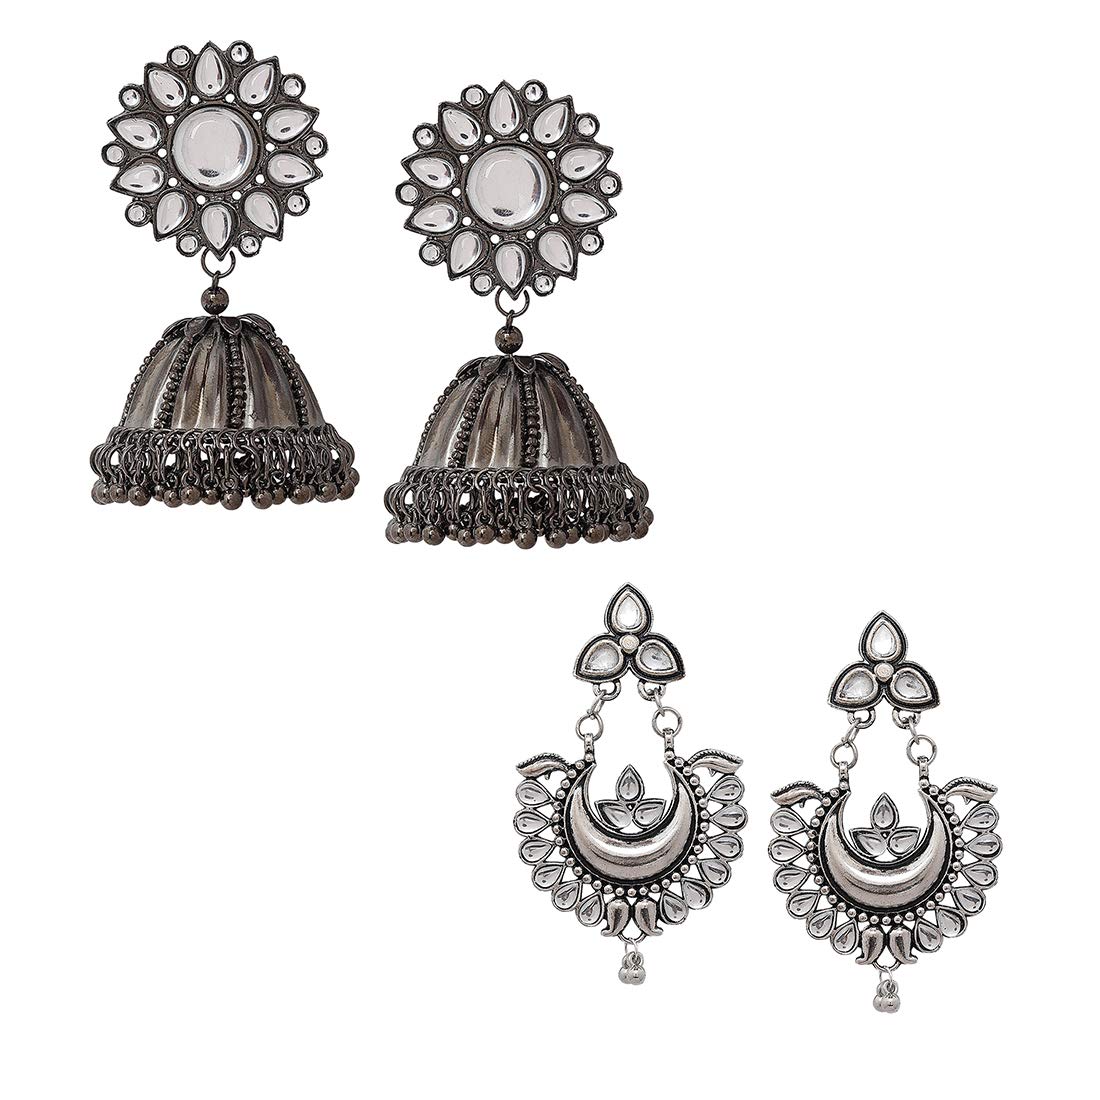 Yellow Chimes Combo of 2 Pairs Ethnic Silver Oxidised Floral Design Studded Stones Chandbali Jhumka Earrings for Women and Girls, medium (YCTJER-02CHNDJHK-C-SLBK), silver, black